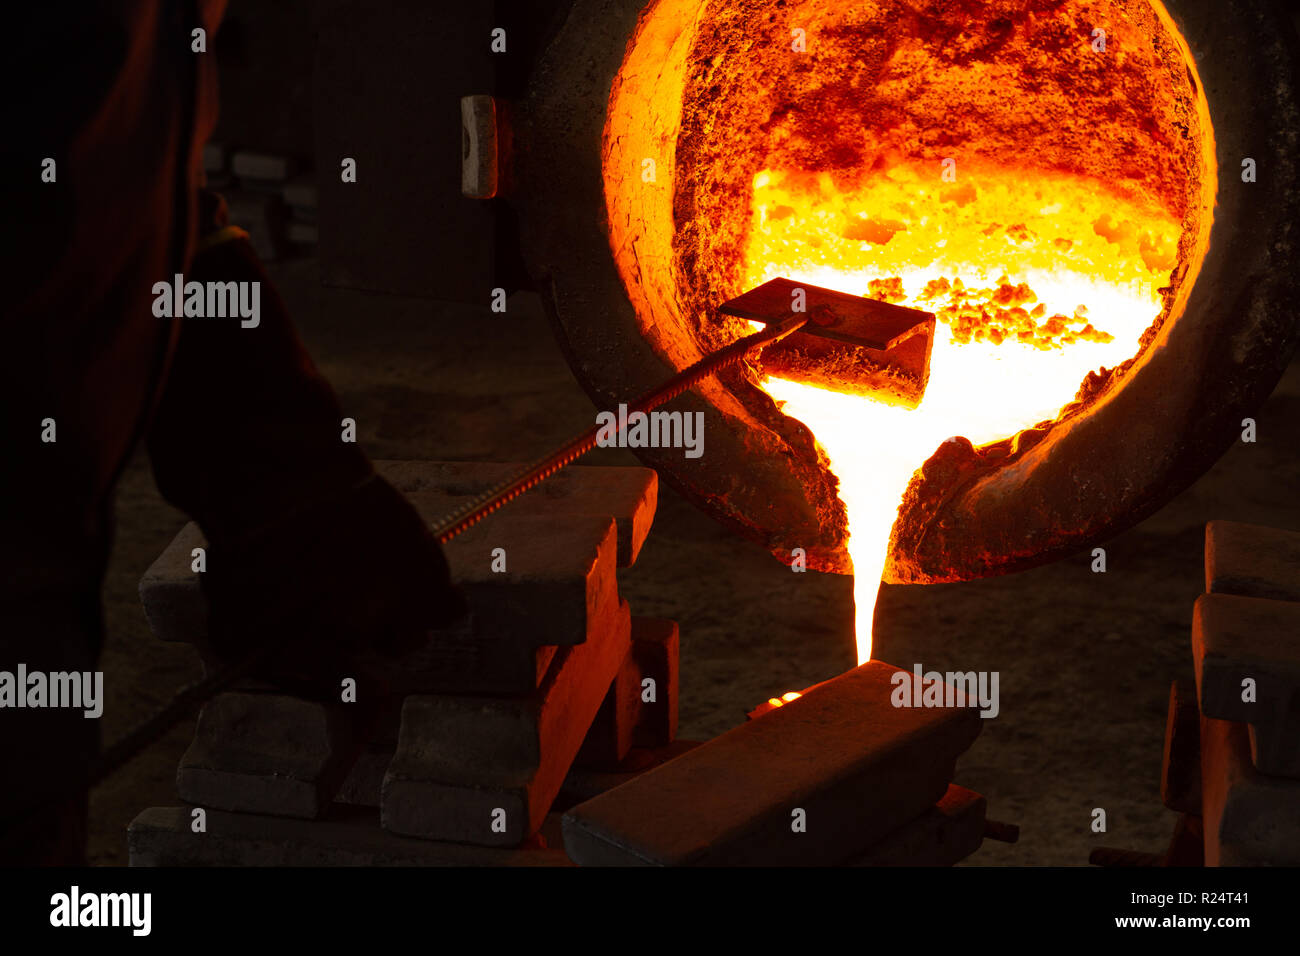 Workers pouring molten metal from flasks into moulds Stock Photo